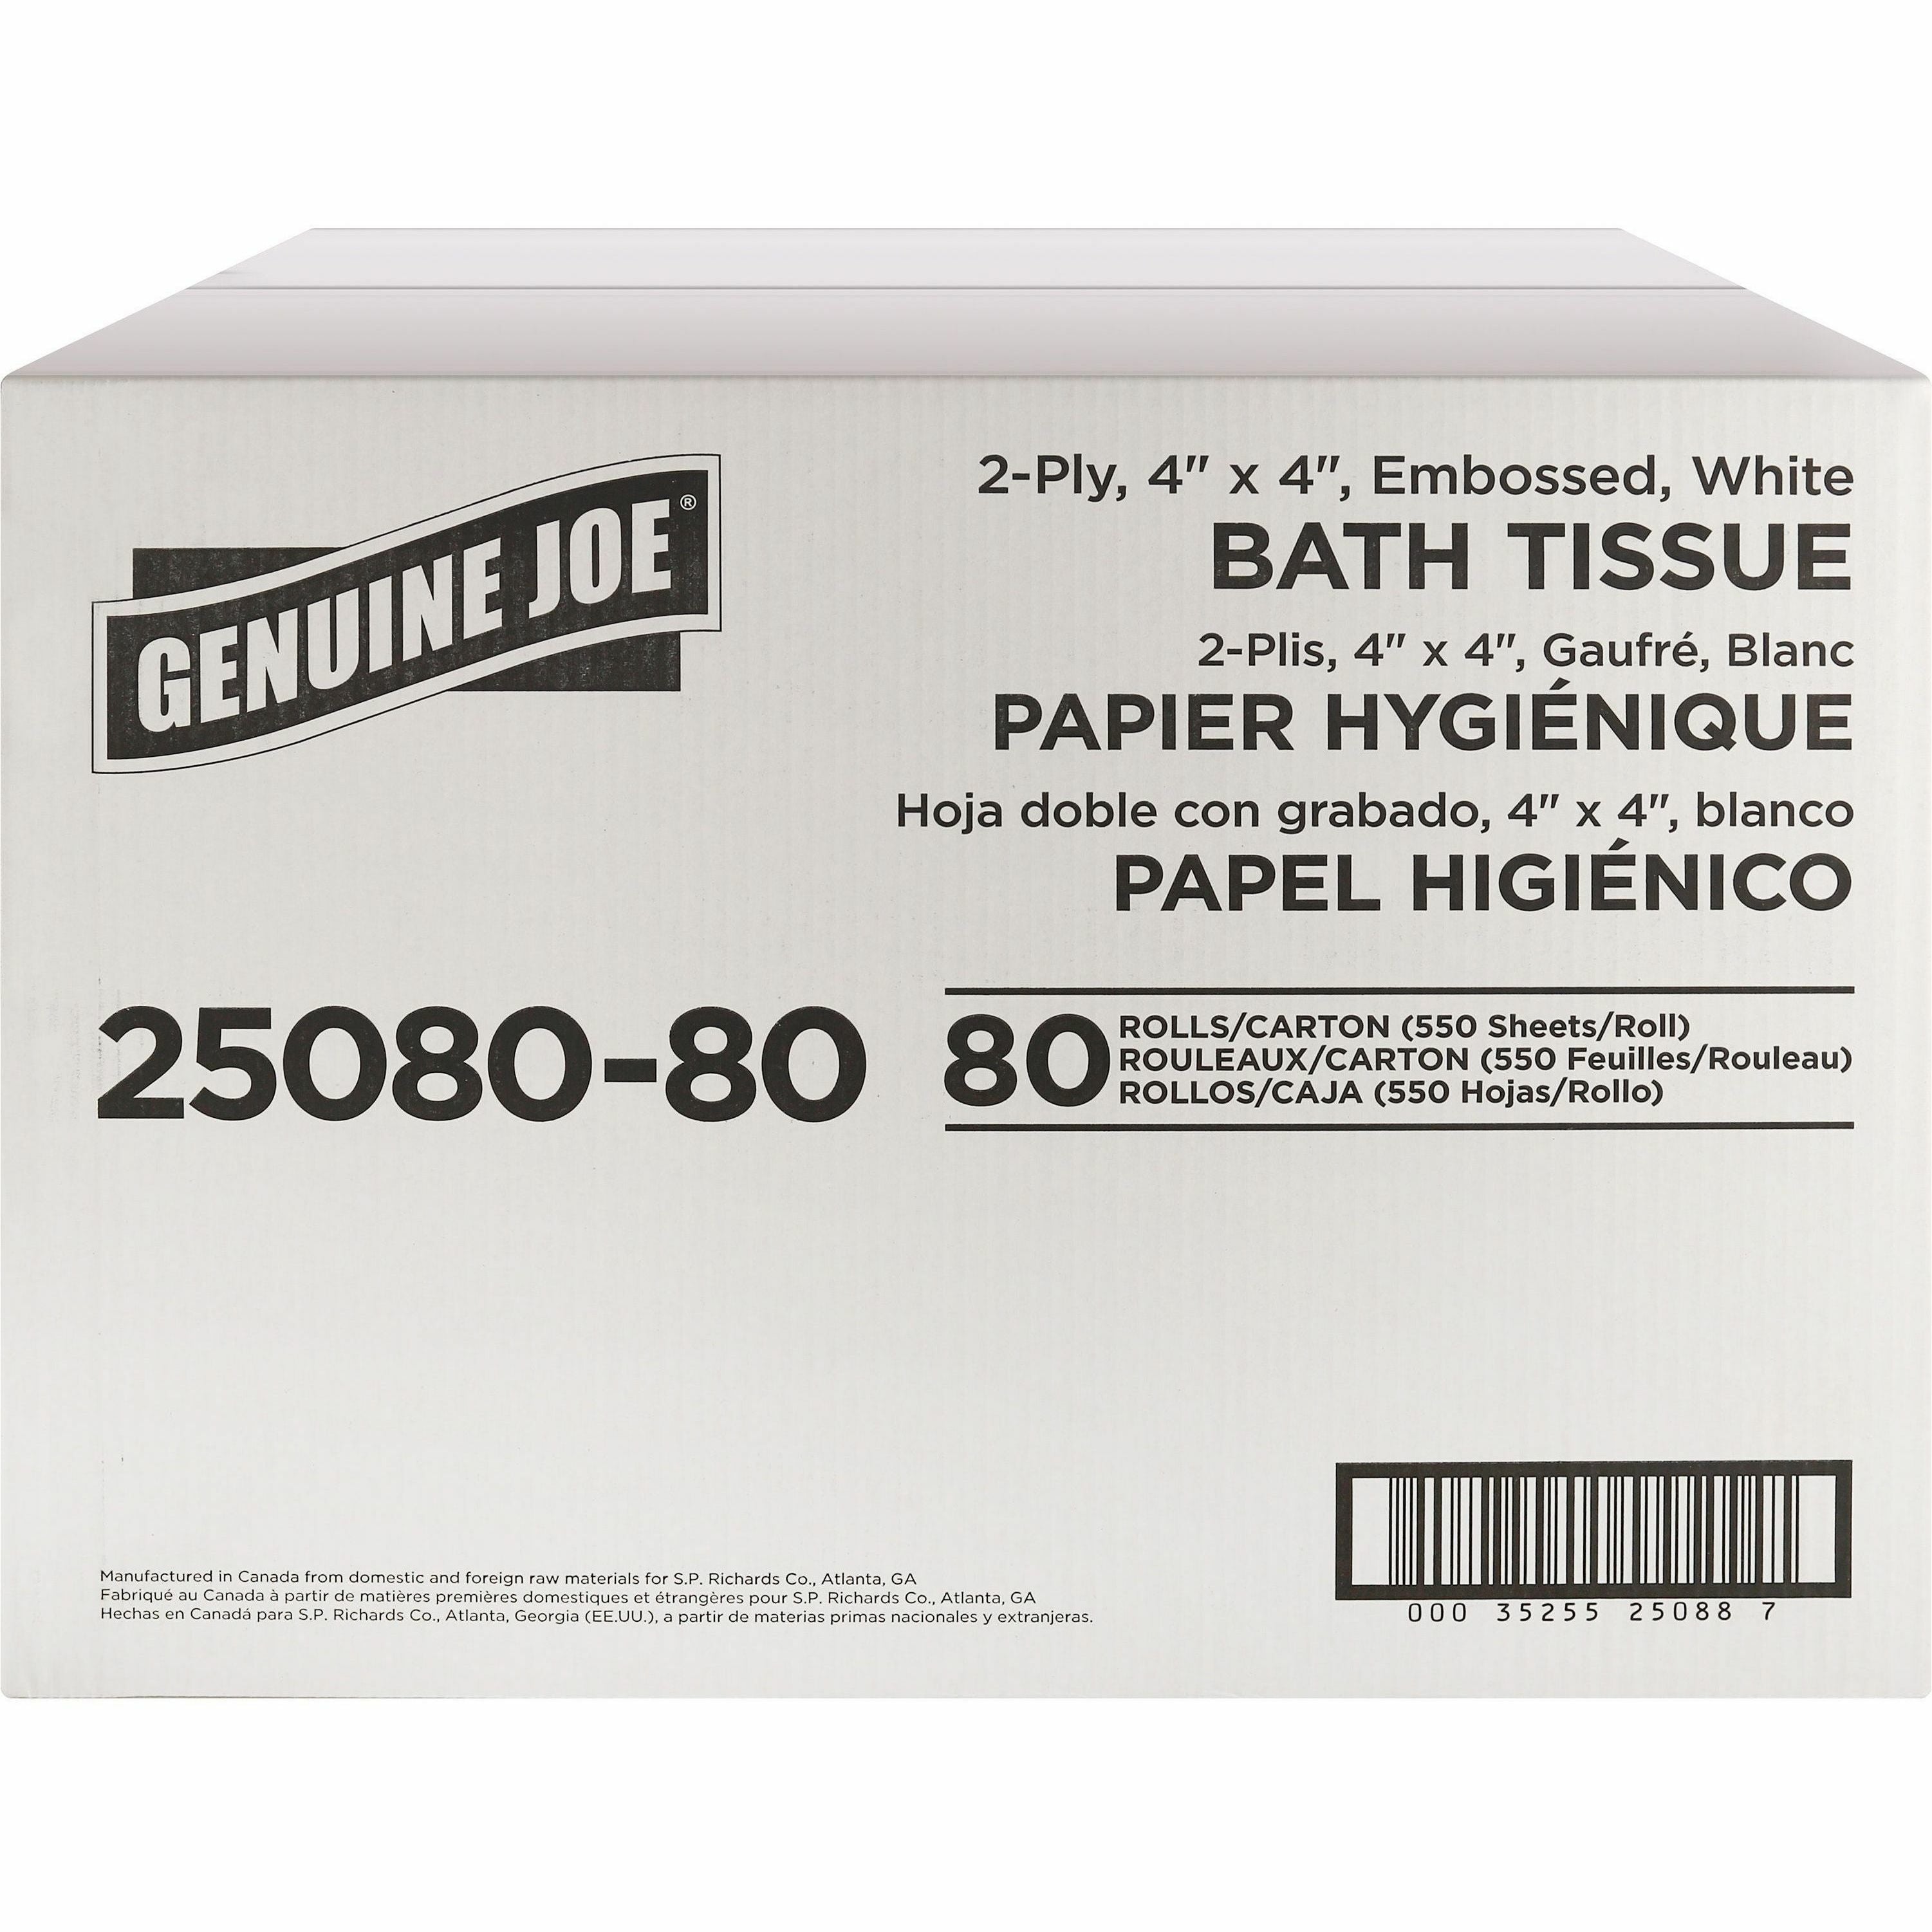 genuine-joe-embossed-roll-bath-tissue-2-ply-4-x-4-550-sheets-roll-163-core-white-soft-absorbent-perforated-for-restroom-80-carton_gjo2508080 - 2